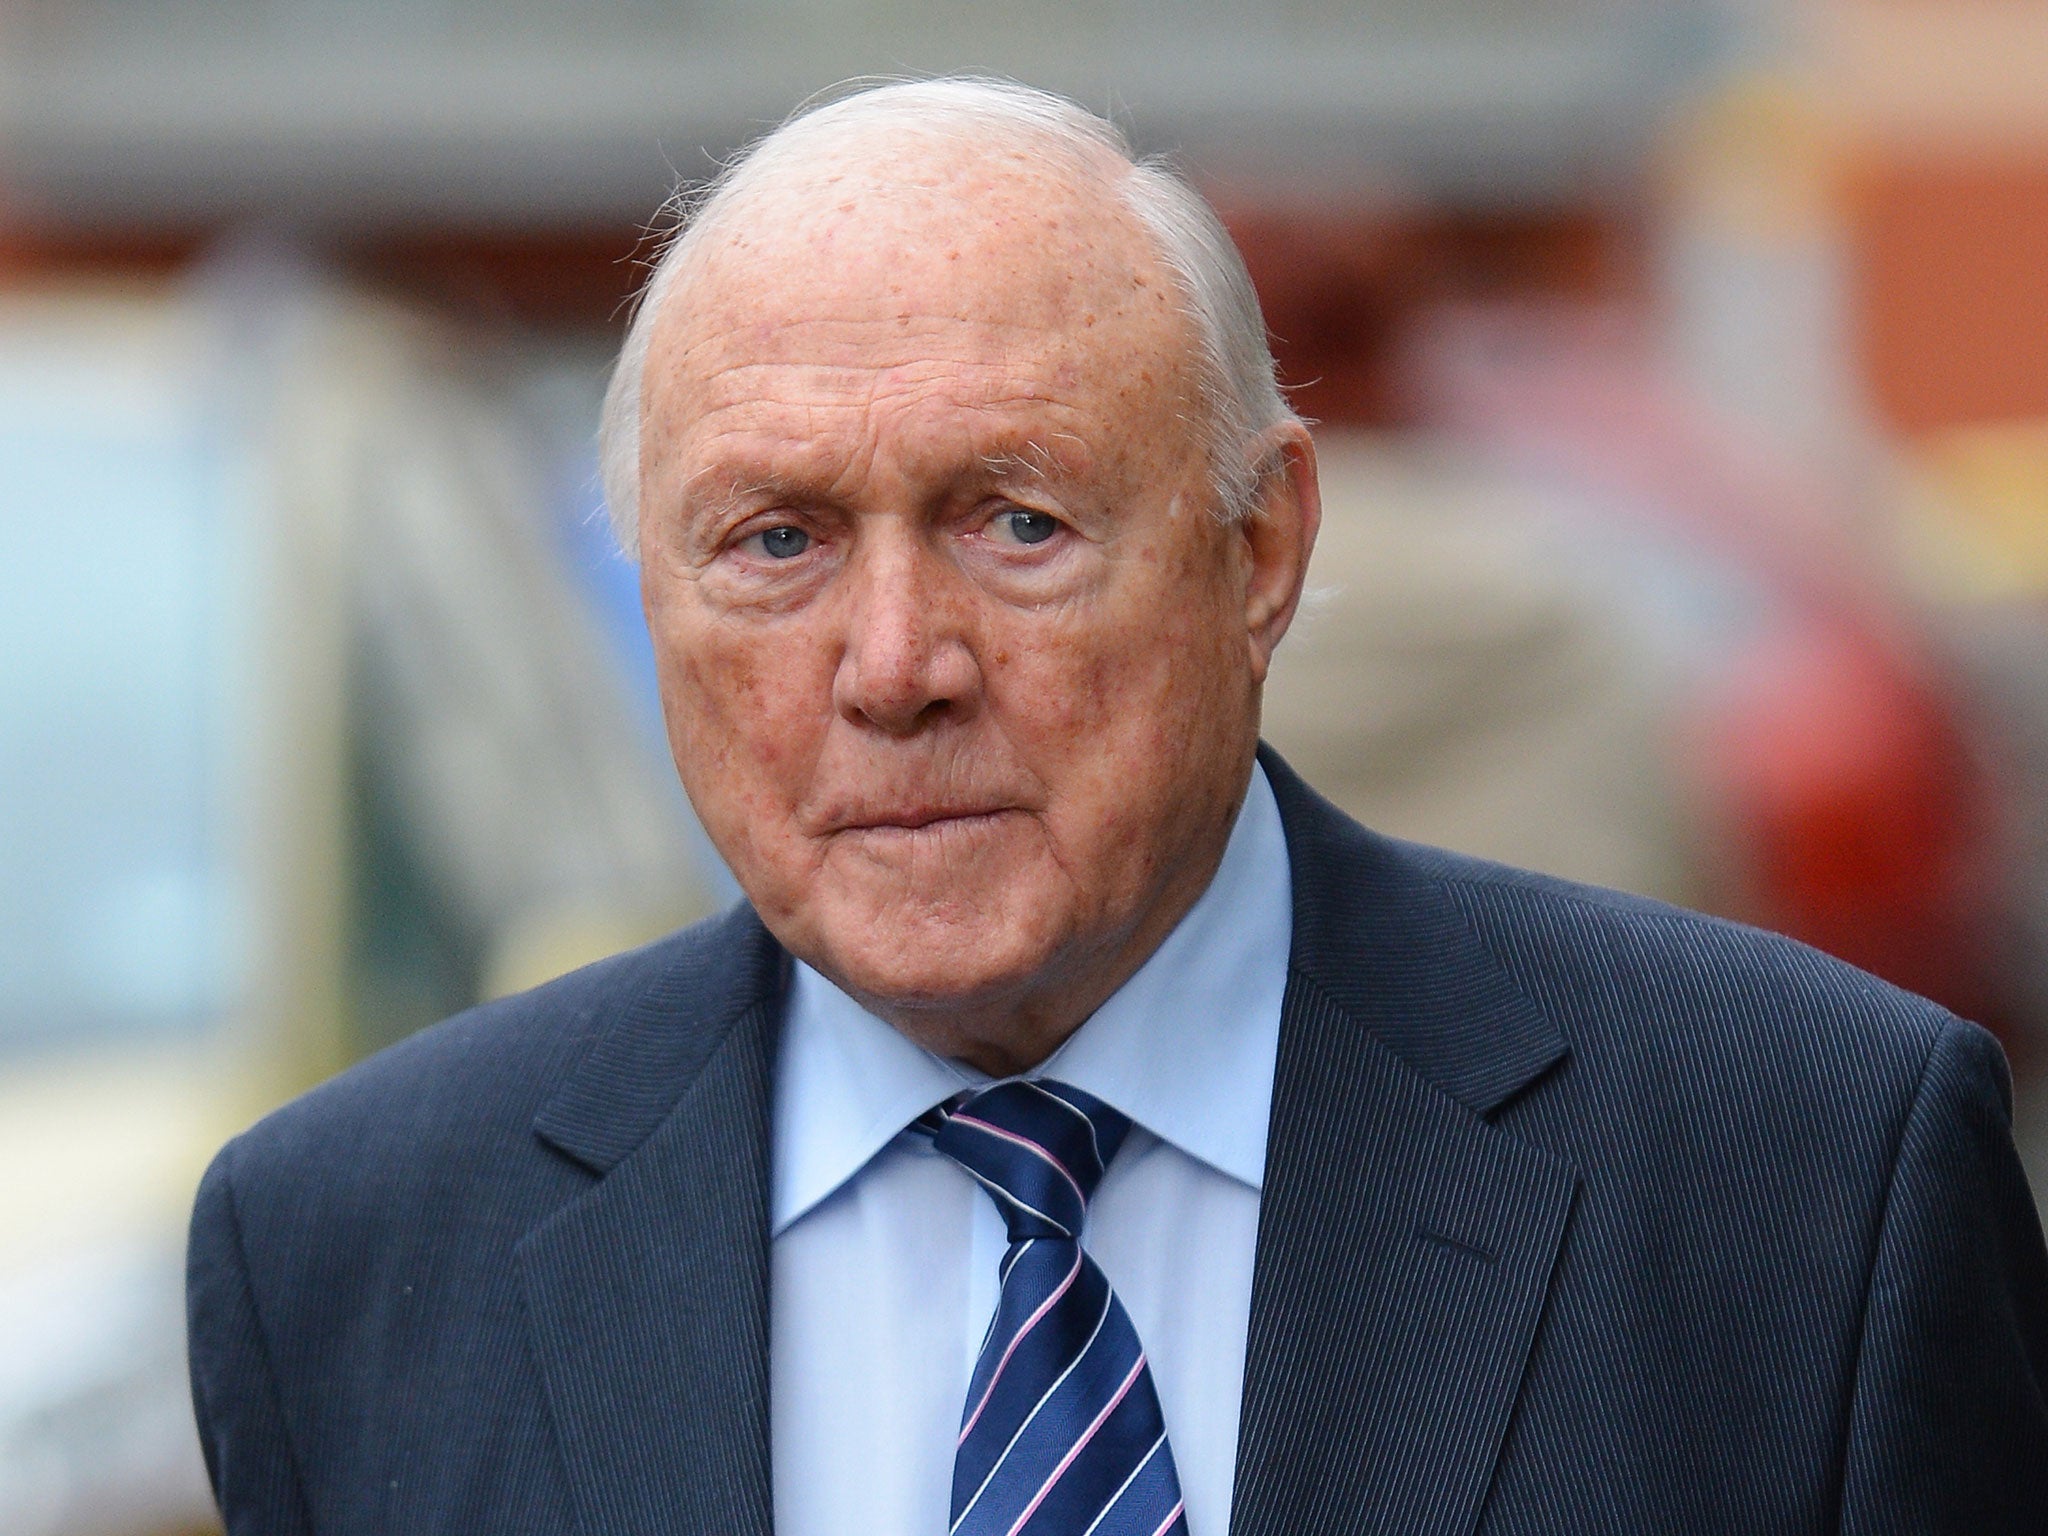 Stuart Hall has pleaded not guilty to sexual offence charges